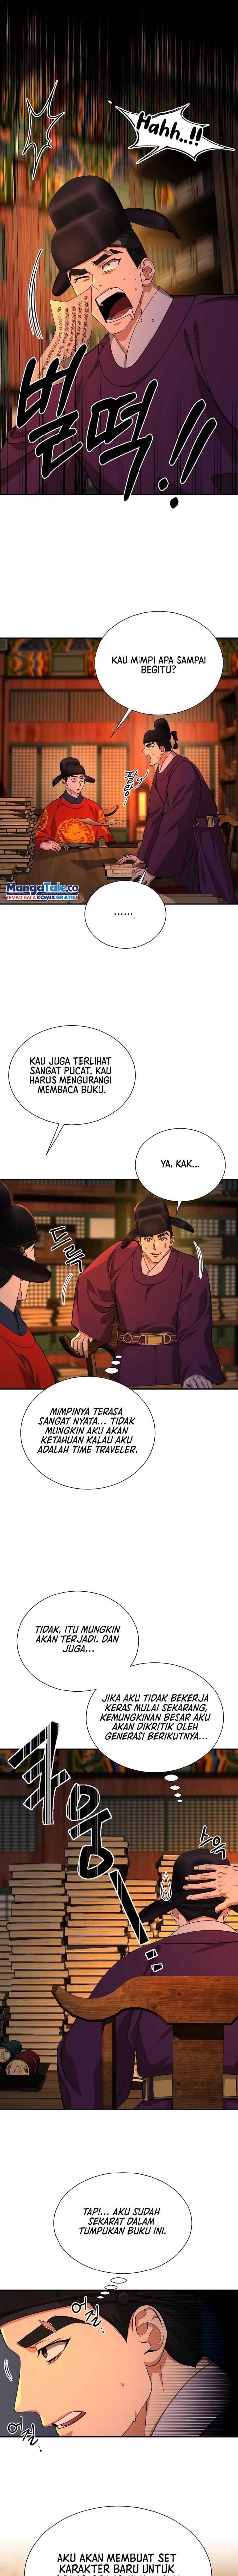 Muscle Joseon Chapter 15